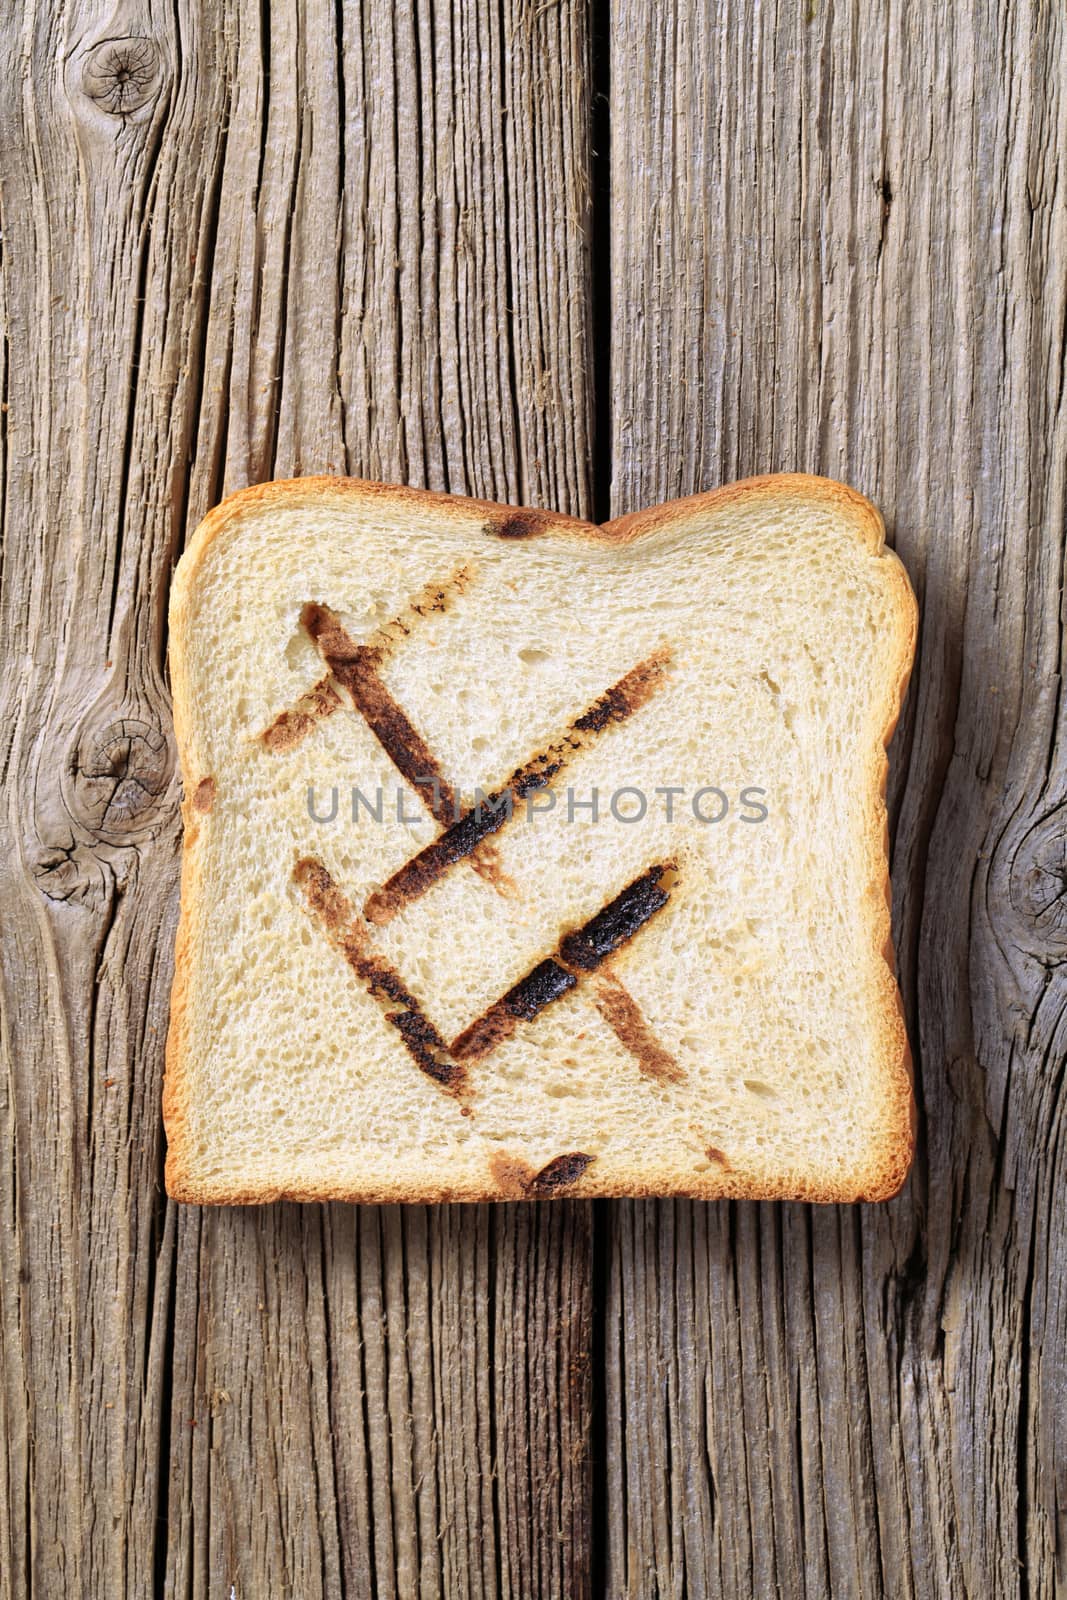 Slice of toasted bread on rough wood